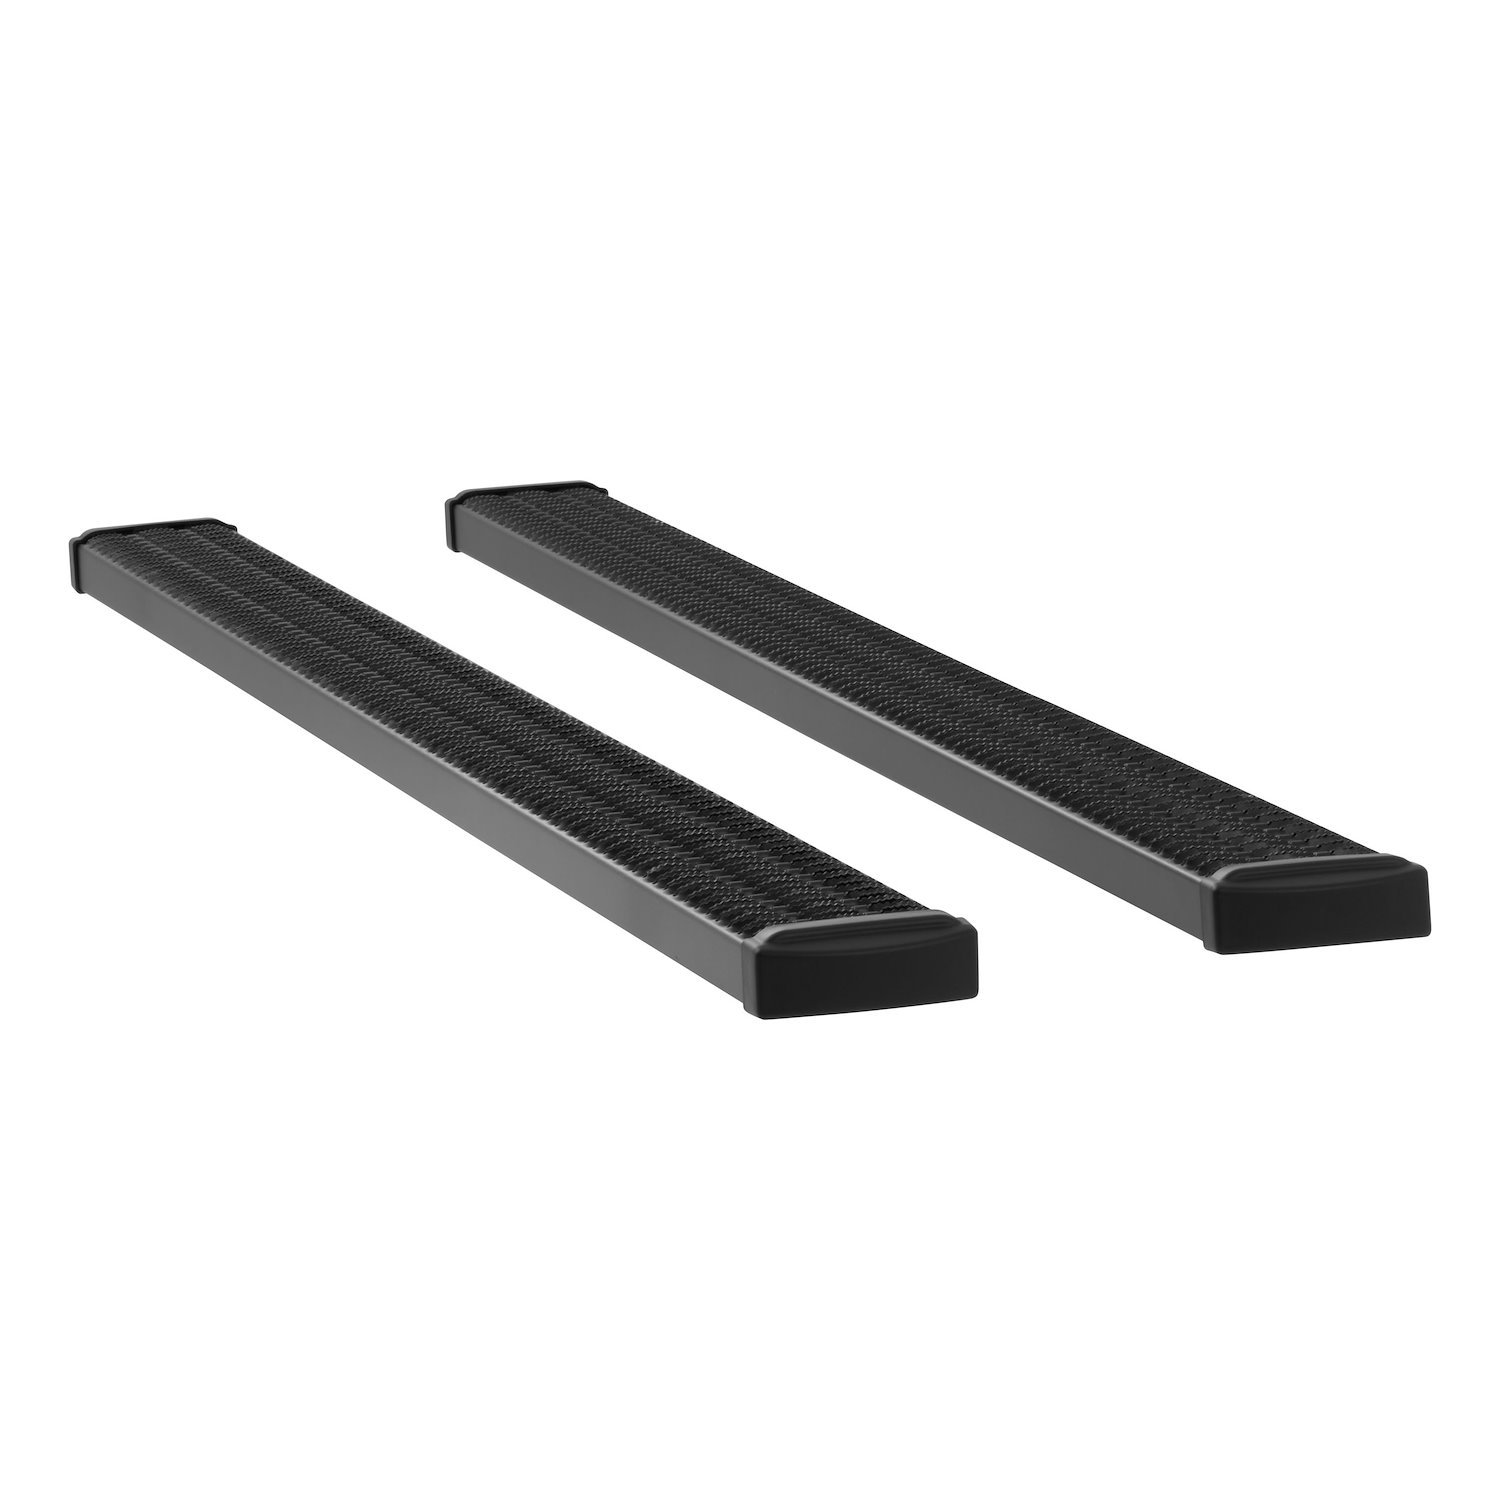 415098-401632 Grip Step 7 in. x 98 in. Black Aluminum Running Boards Fits Select Ram 2500, 3500